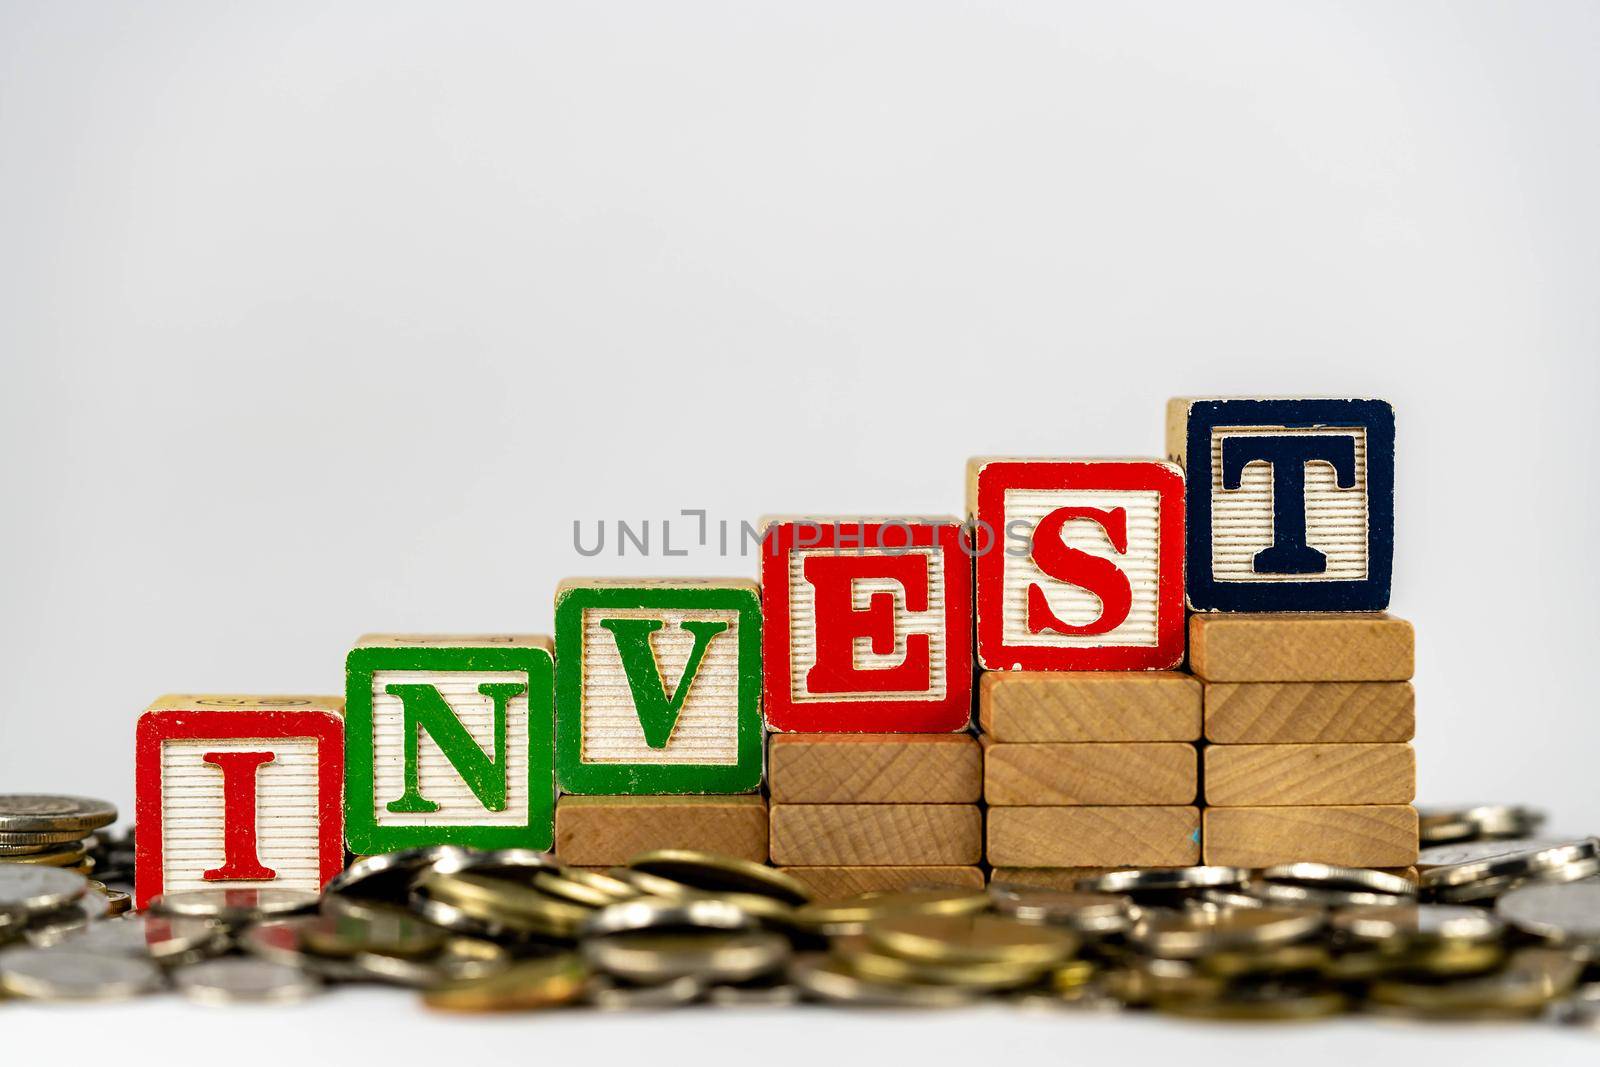 Investment concept with wooden blocks and coins. Invest letters on wooden blocks sorrounded with money by billroque